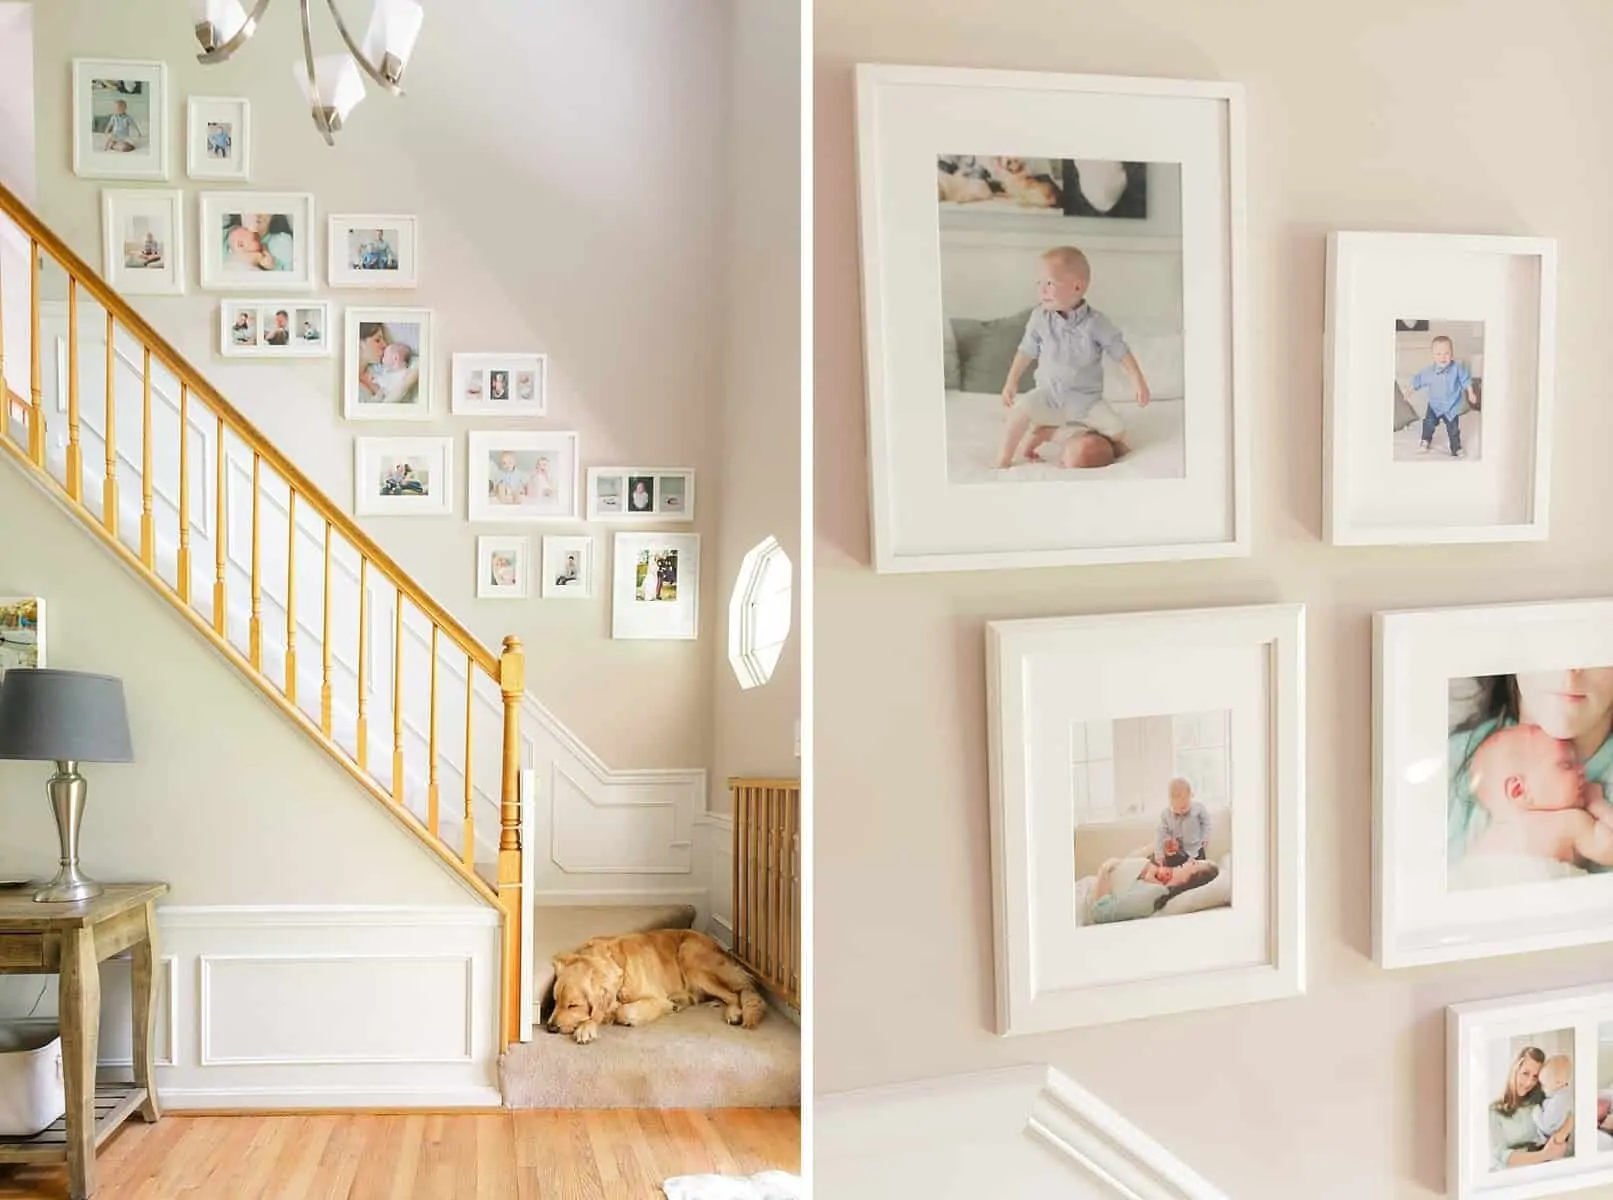 Decorating Your Home With Photos - My Staircase Gallery Wall